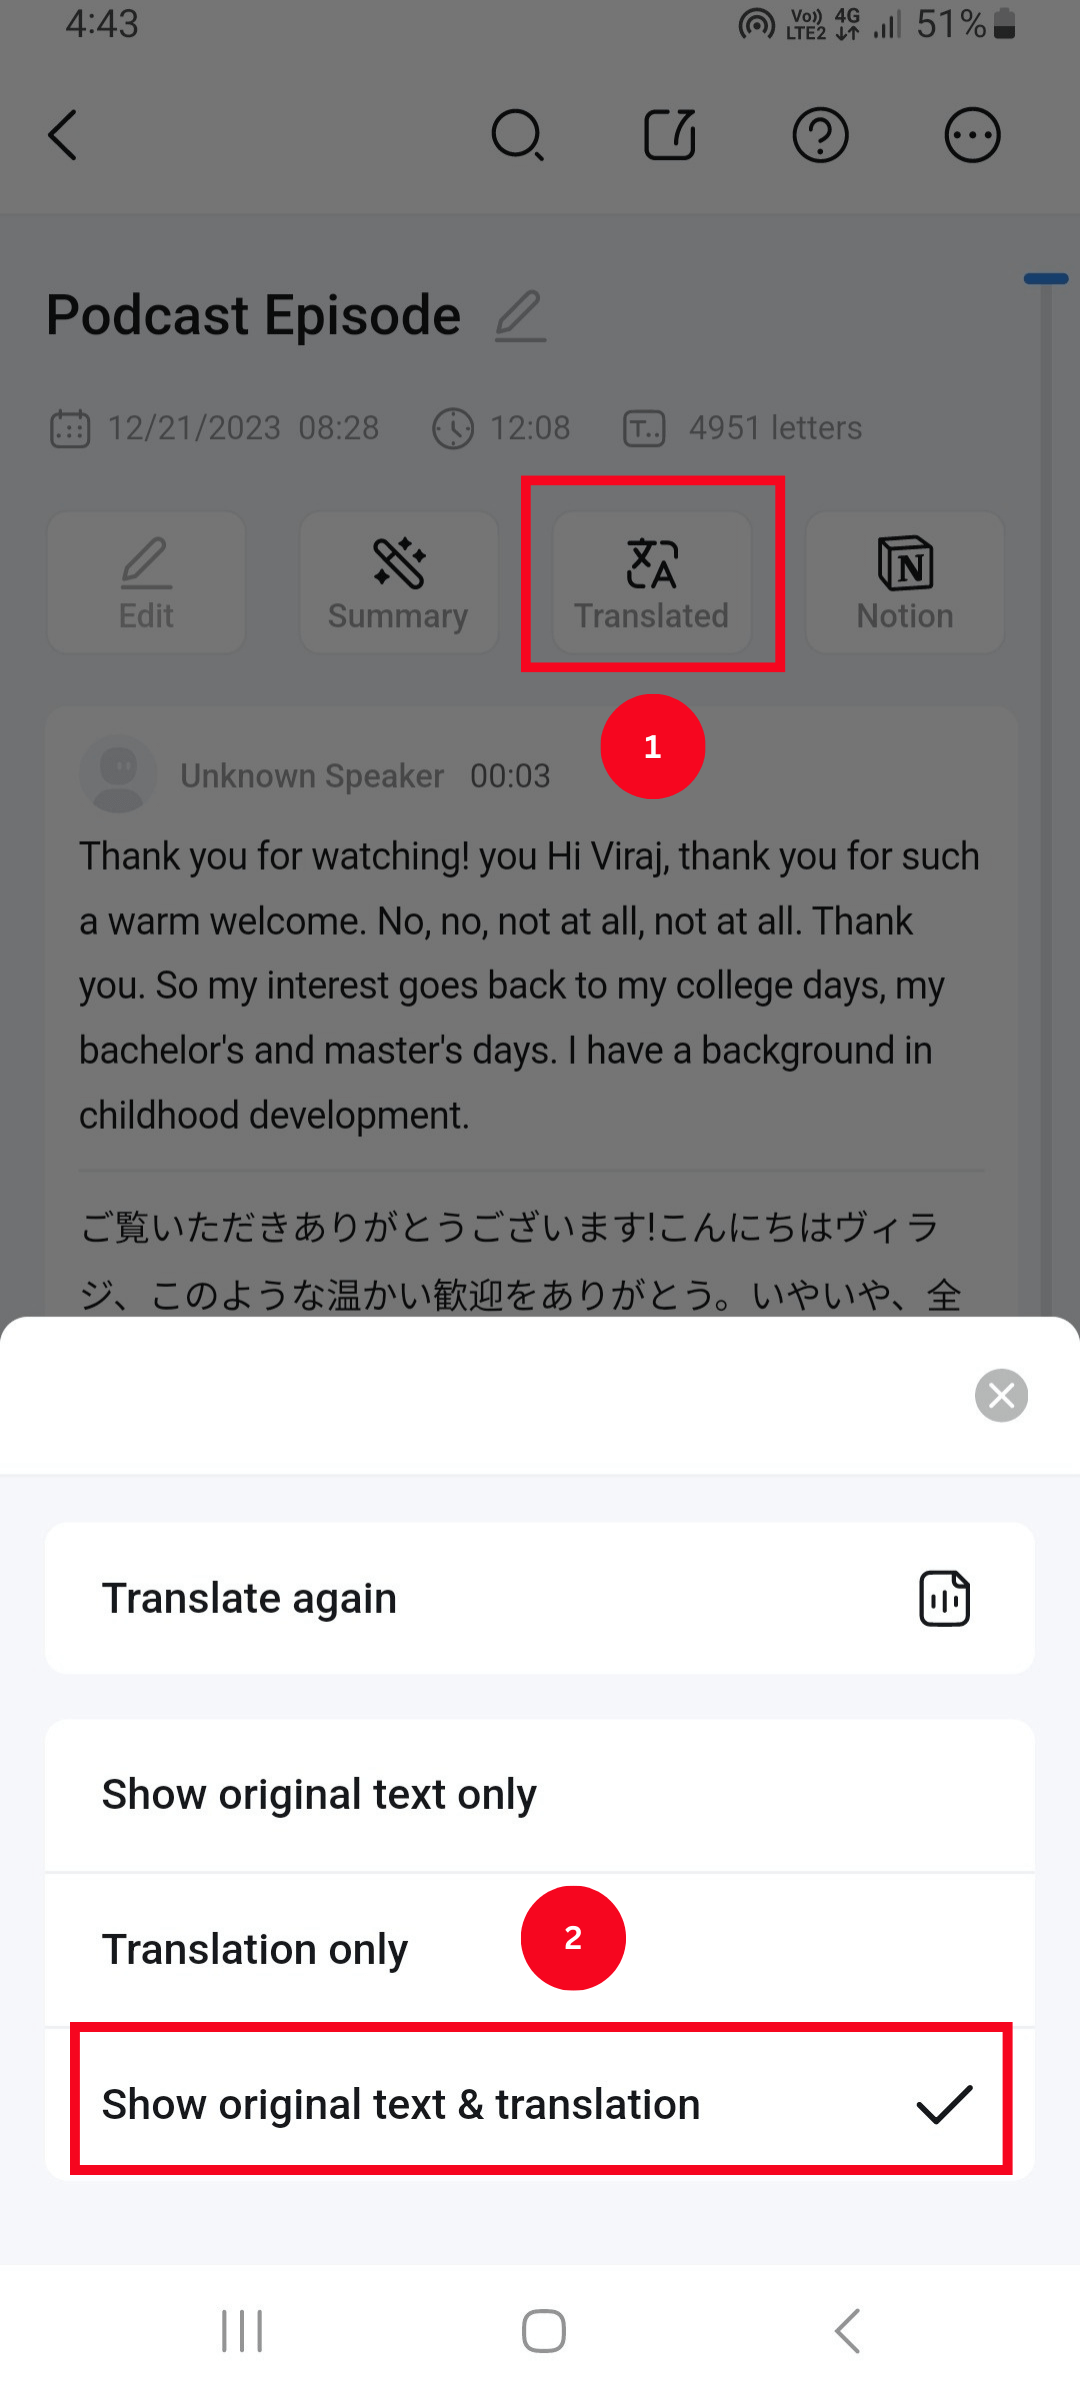 Click the Translated option and choose Show Original Text & Translation